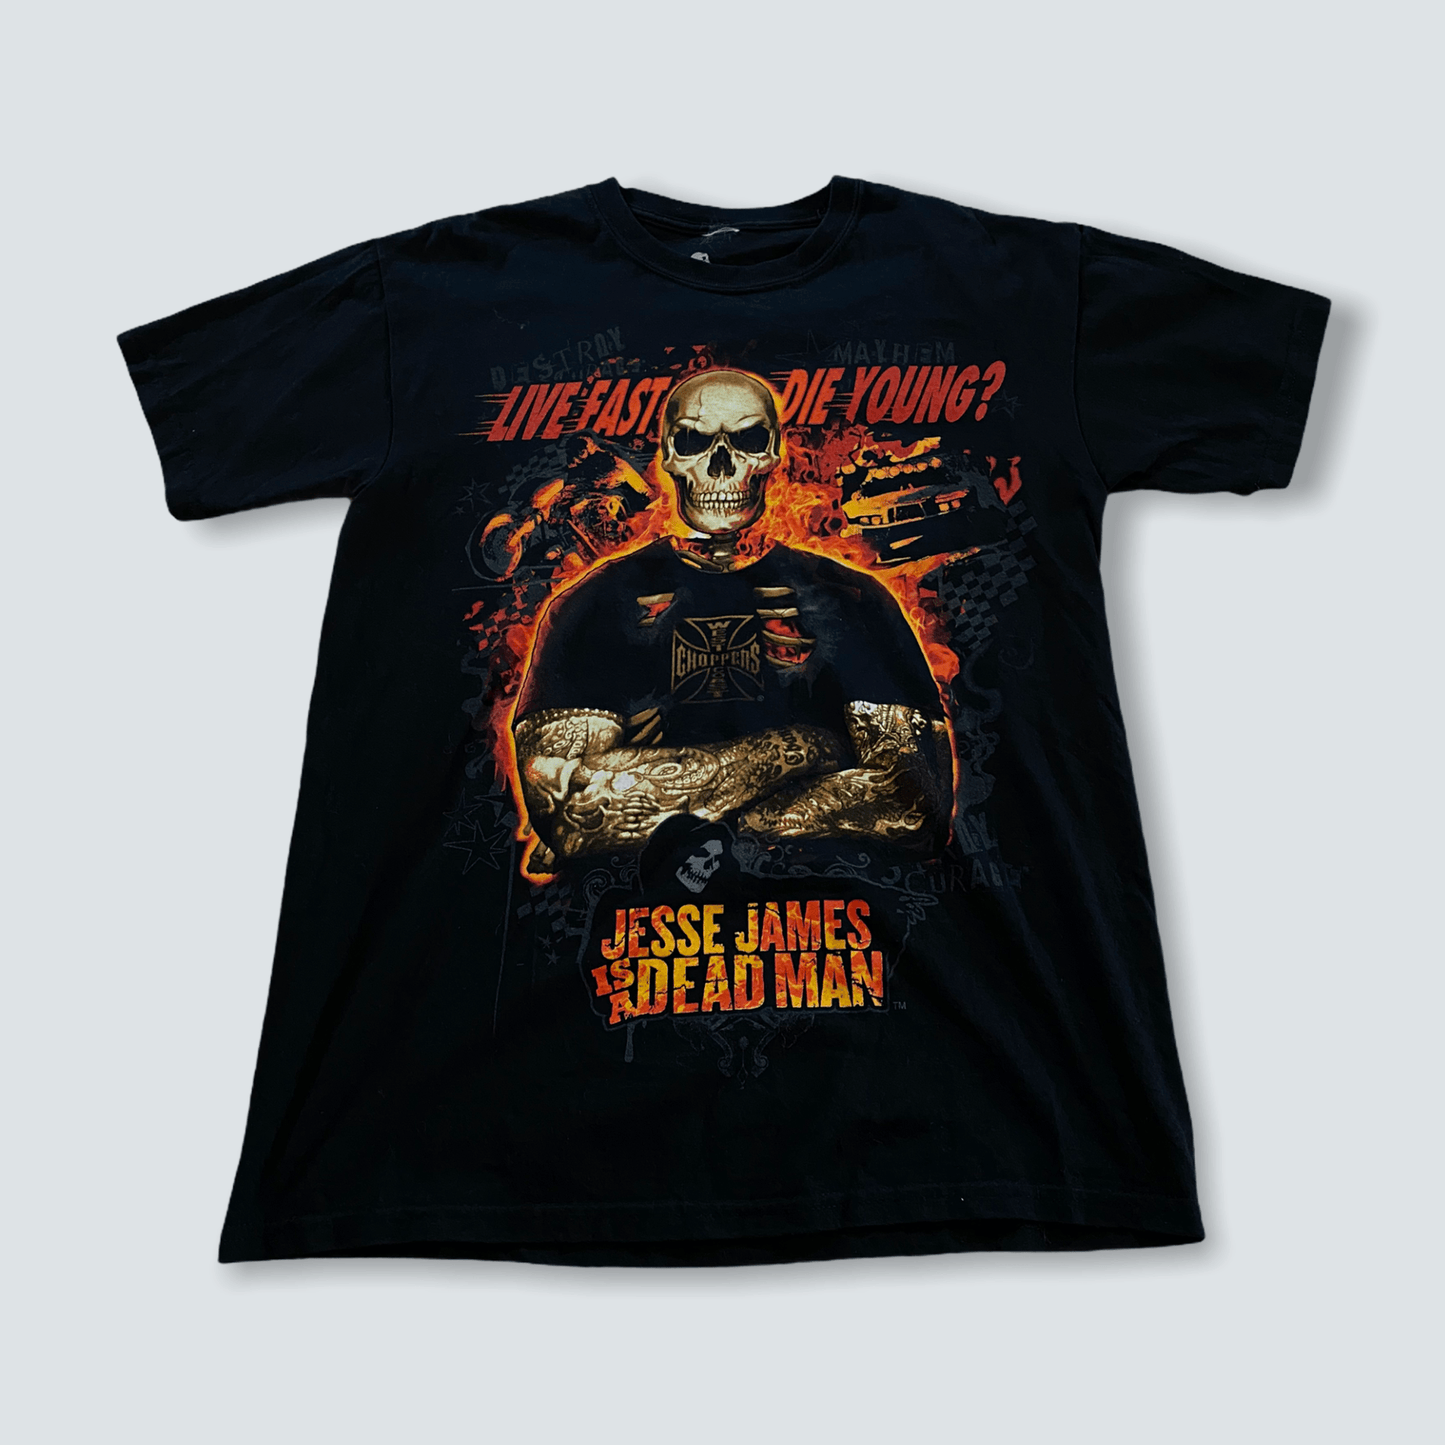 Jesse James is a dead man tee (M) - Known Source